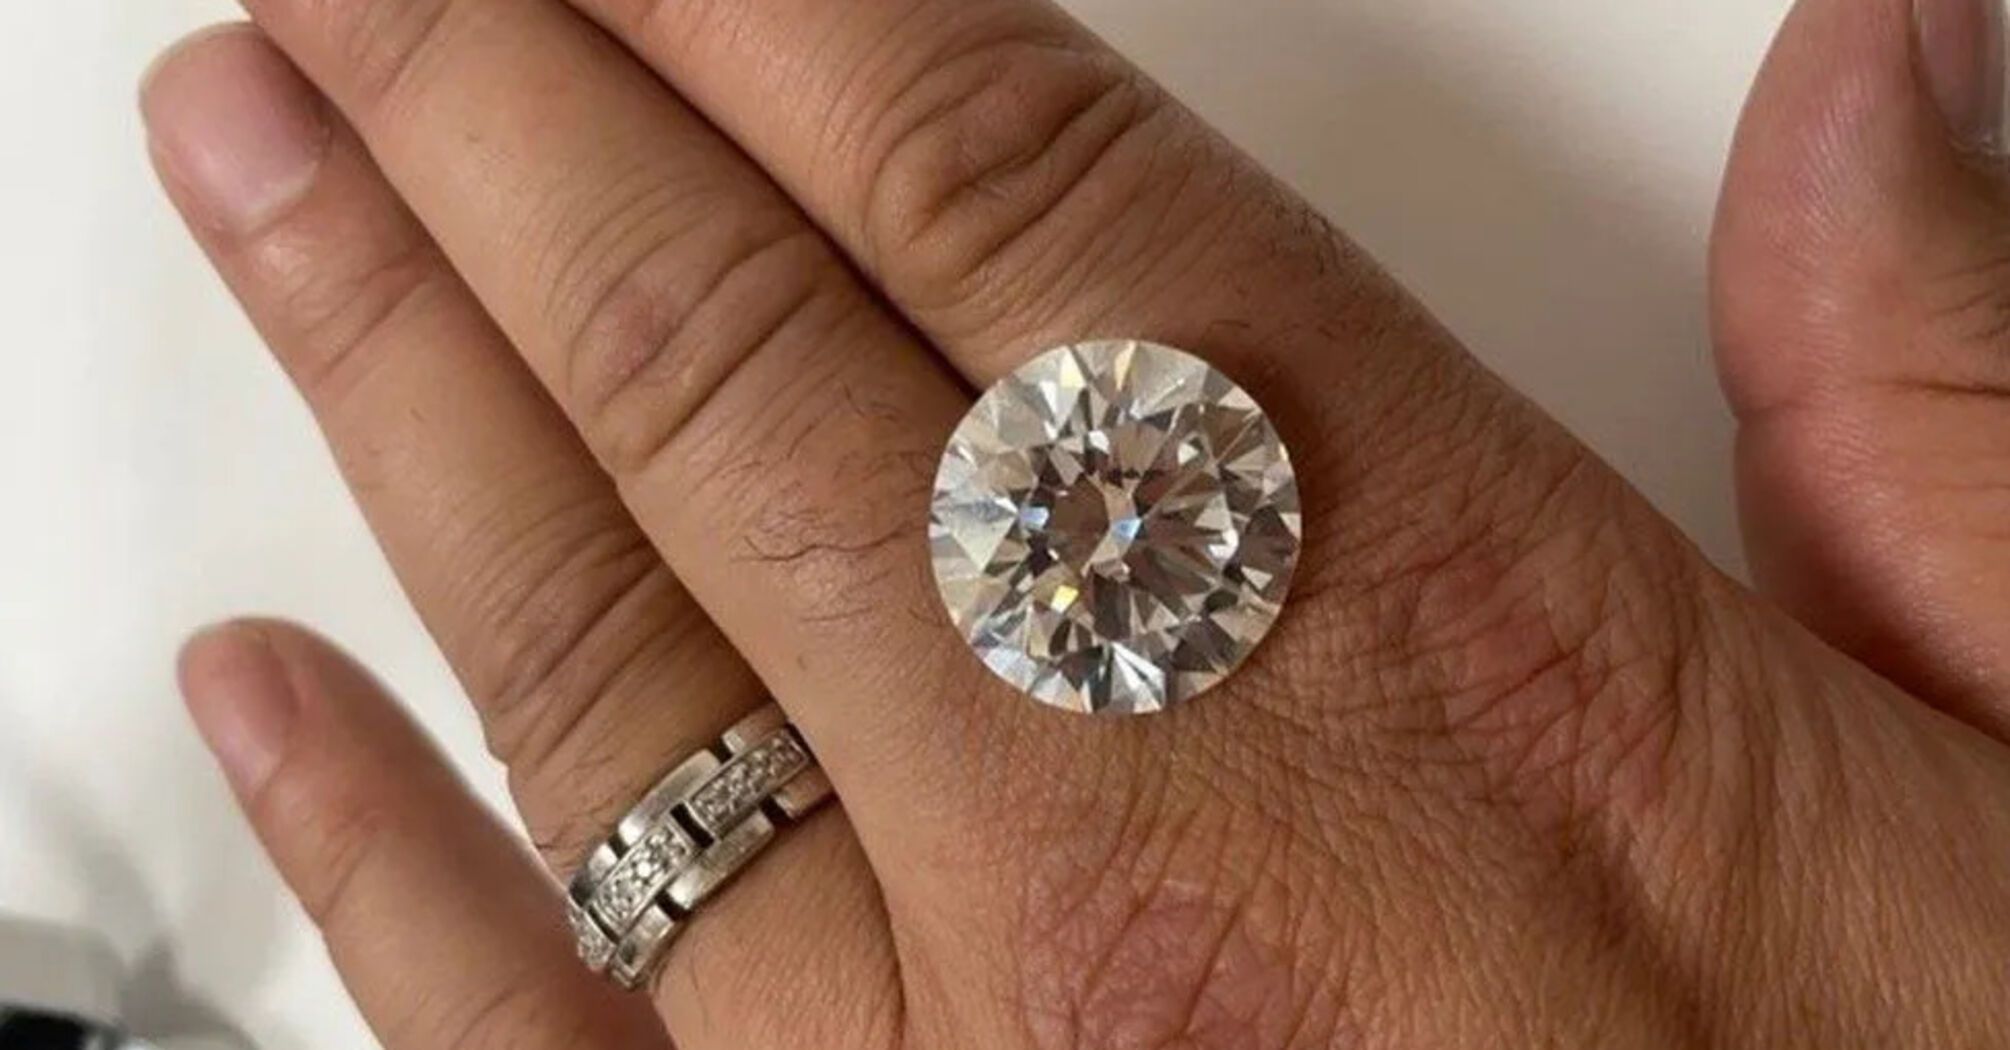 The woman found a ring at the flea market worth 23 million hryvnias